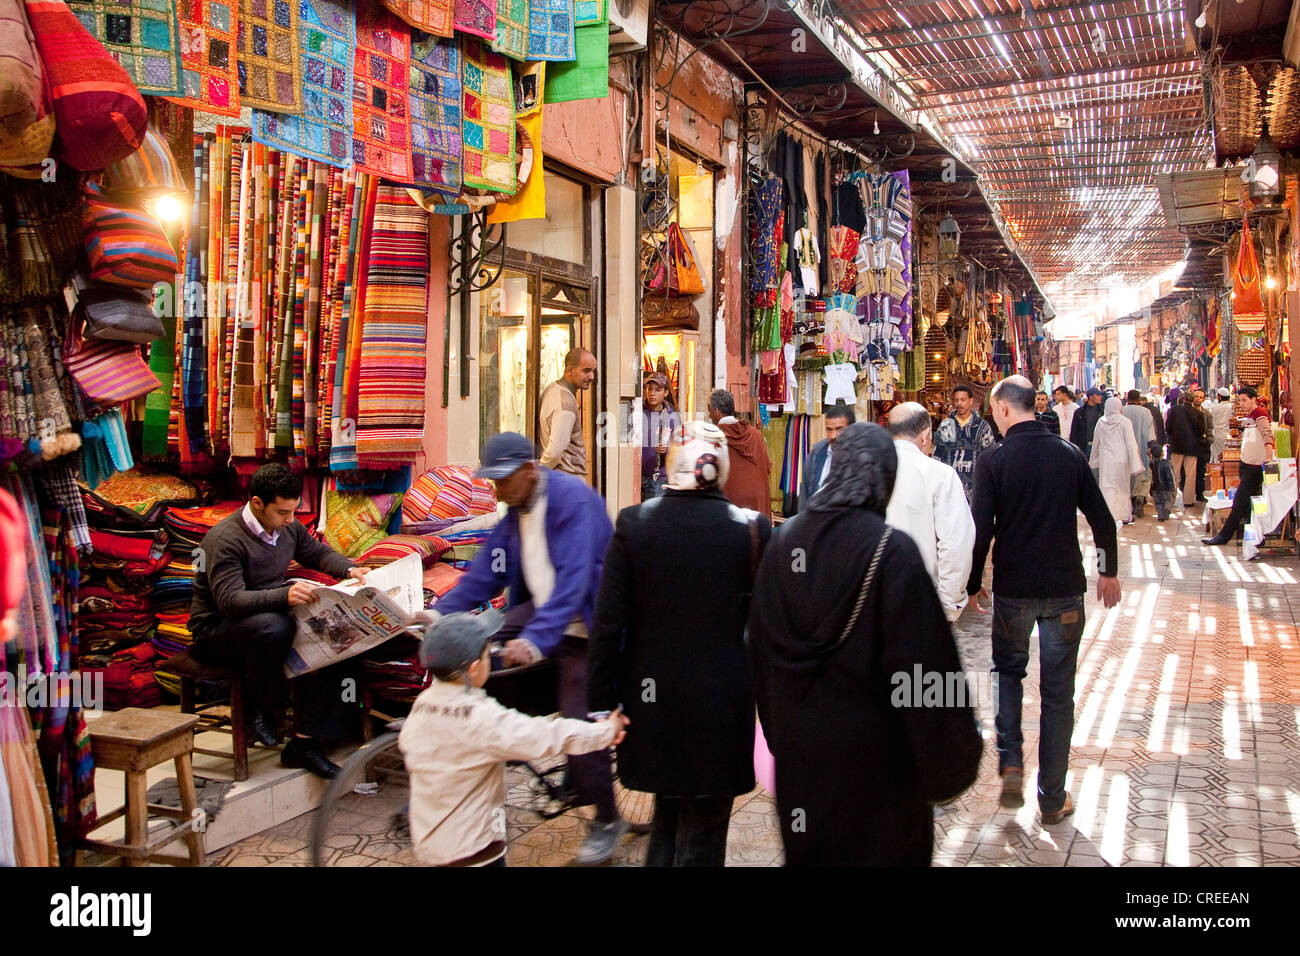 Shops in the souq, market, in the Medina, historic district, Marrakech, Morocco, Africa Stock Photo